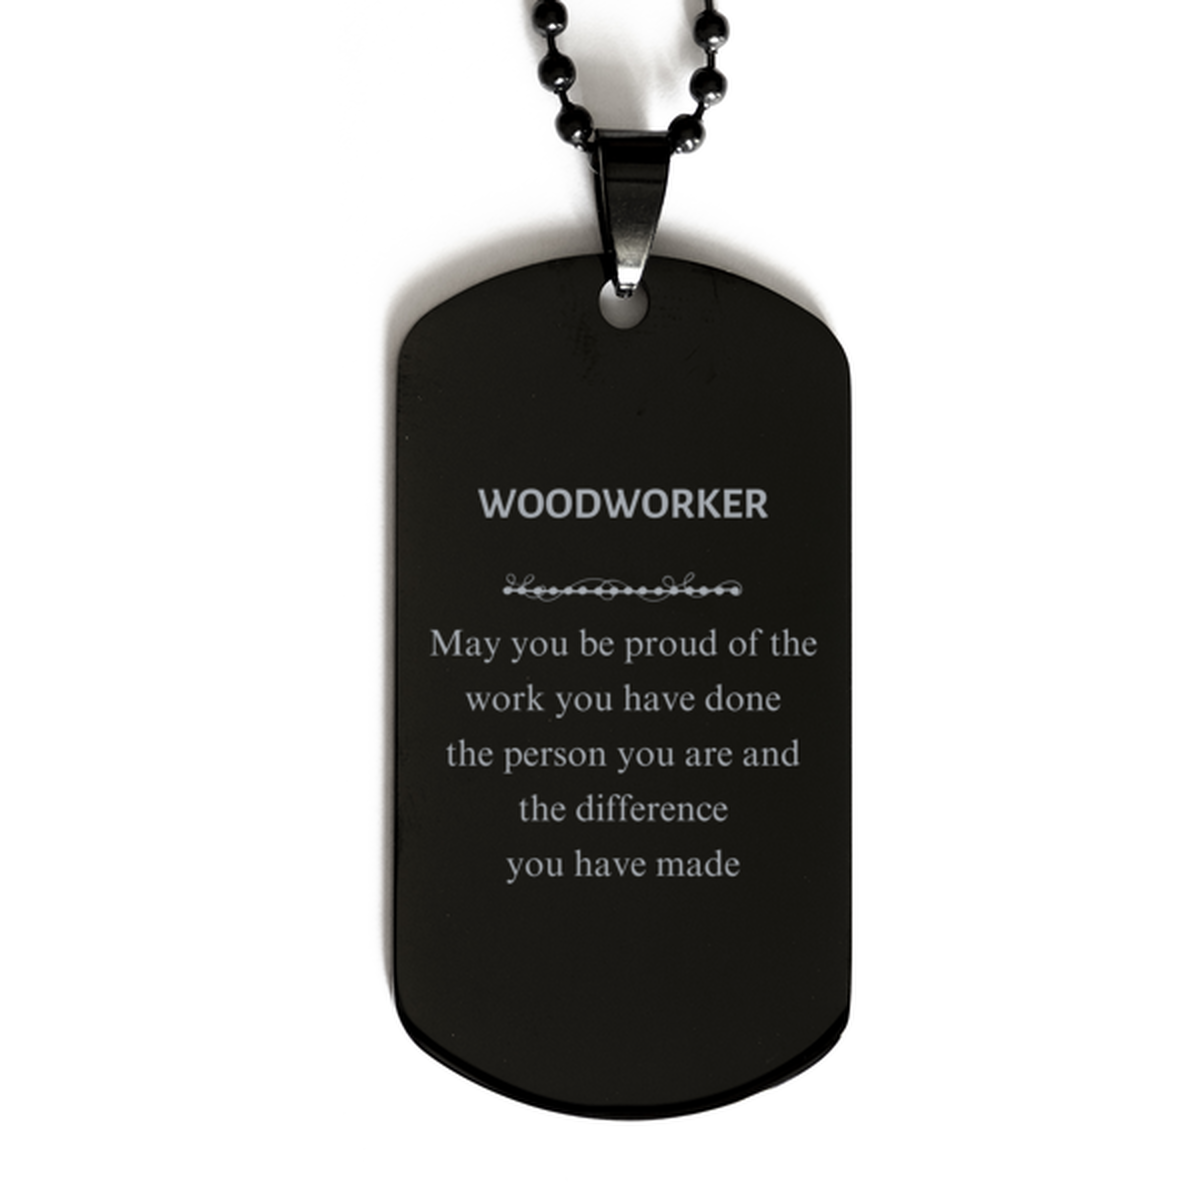 Woodworker May you be proud of the work you have done, Retirement Woodworker Black Dog Tag for Colleague Appreciation Gifts Amazing for Woodworker